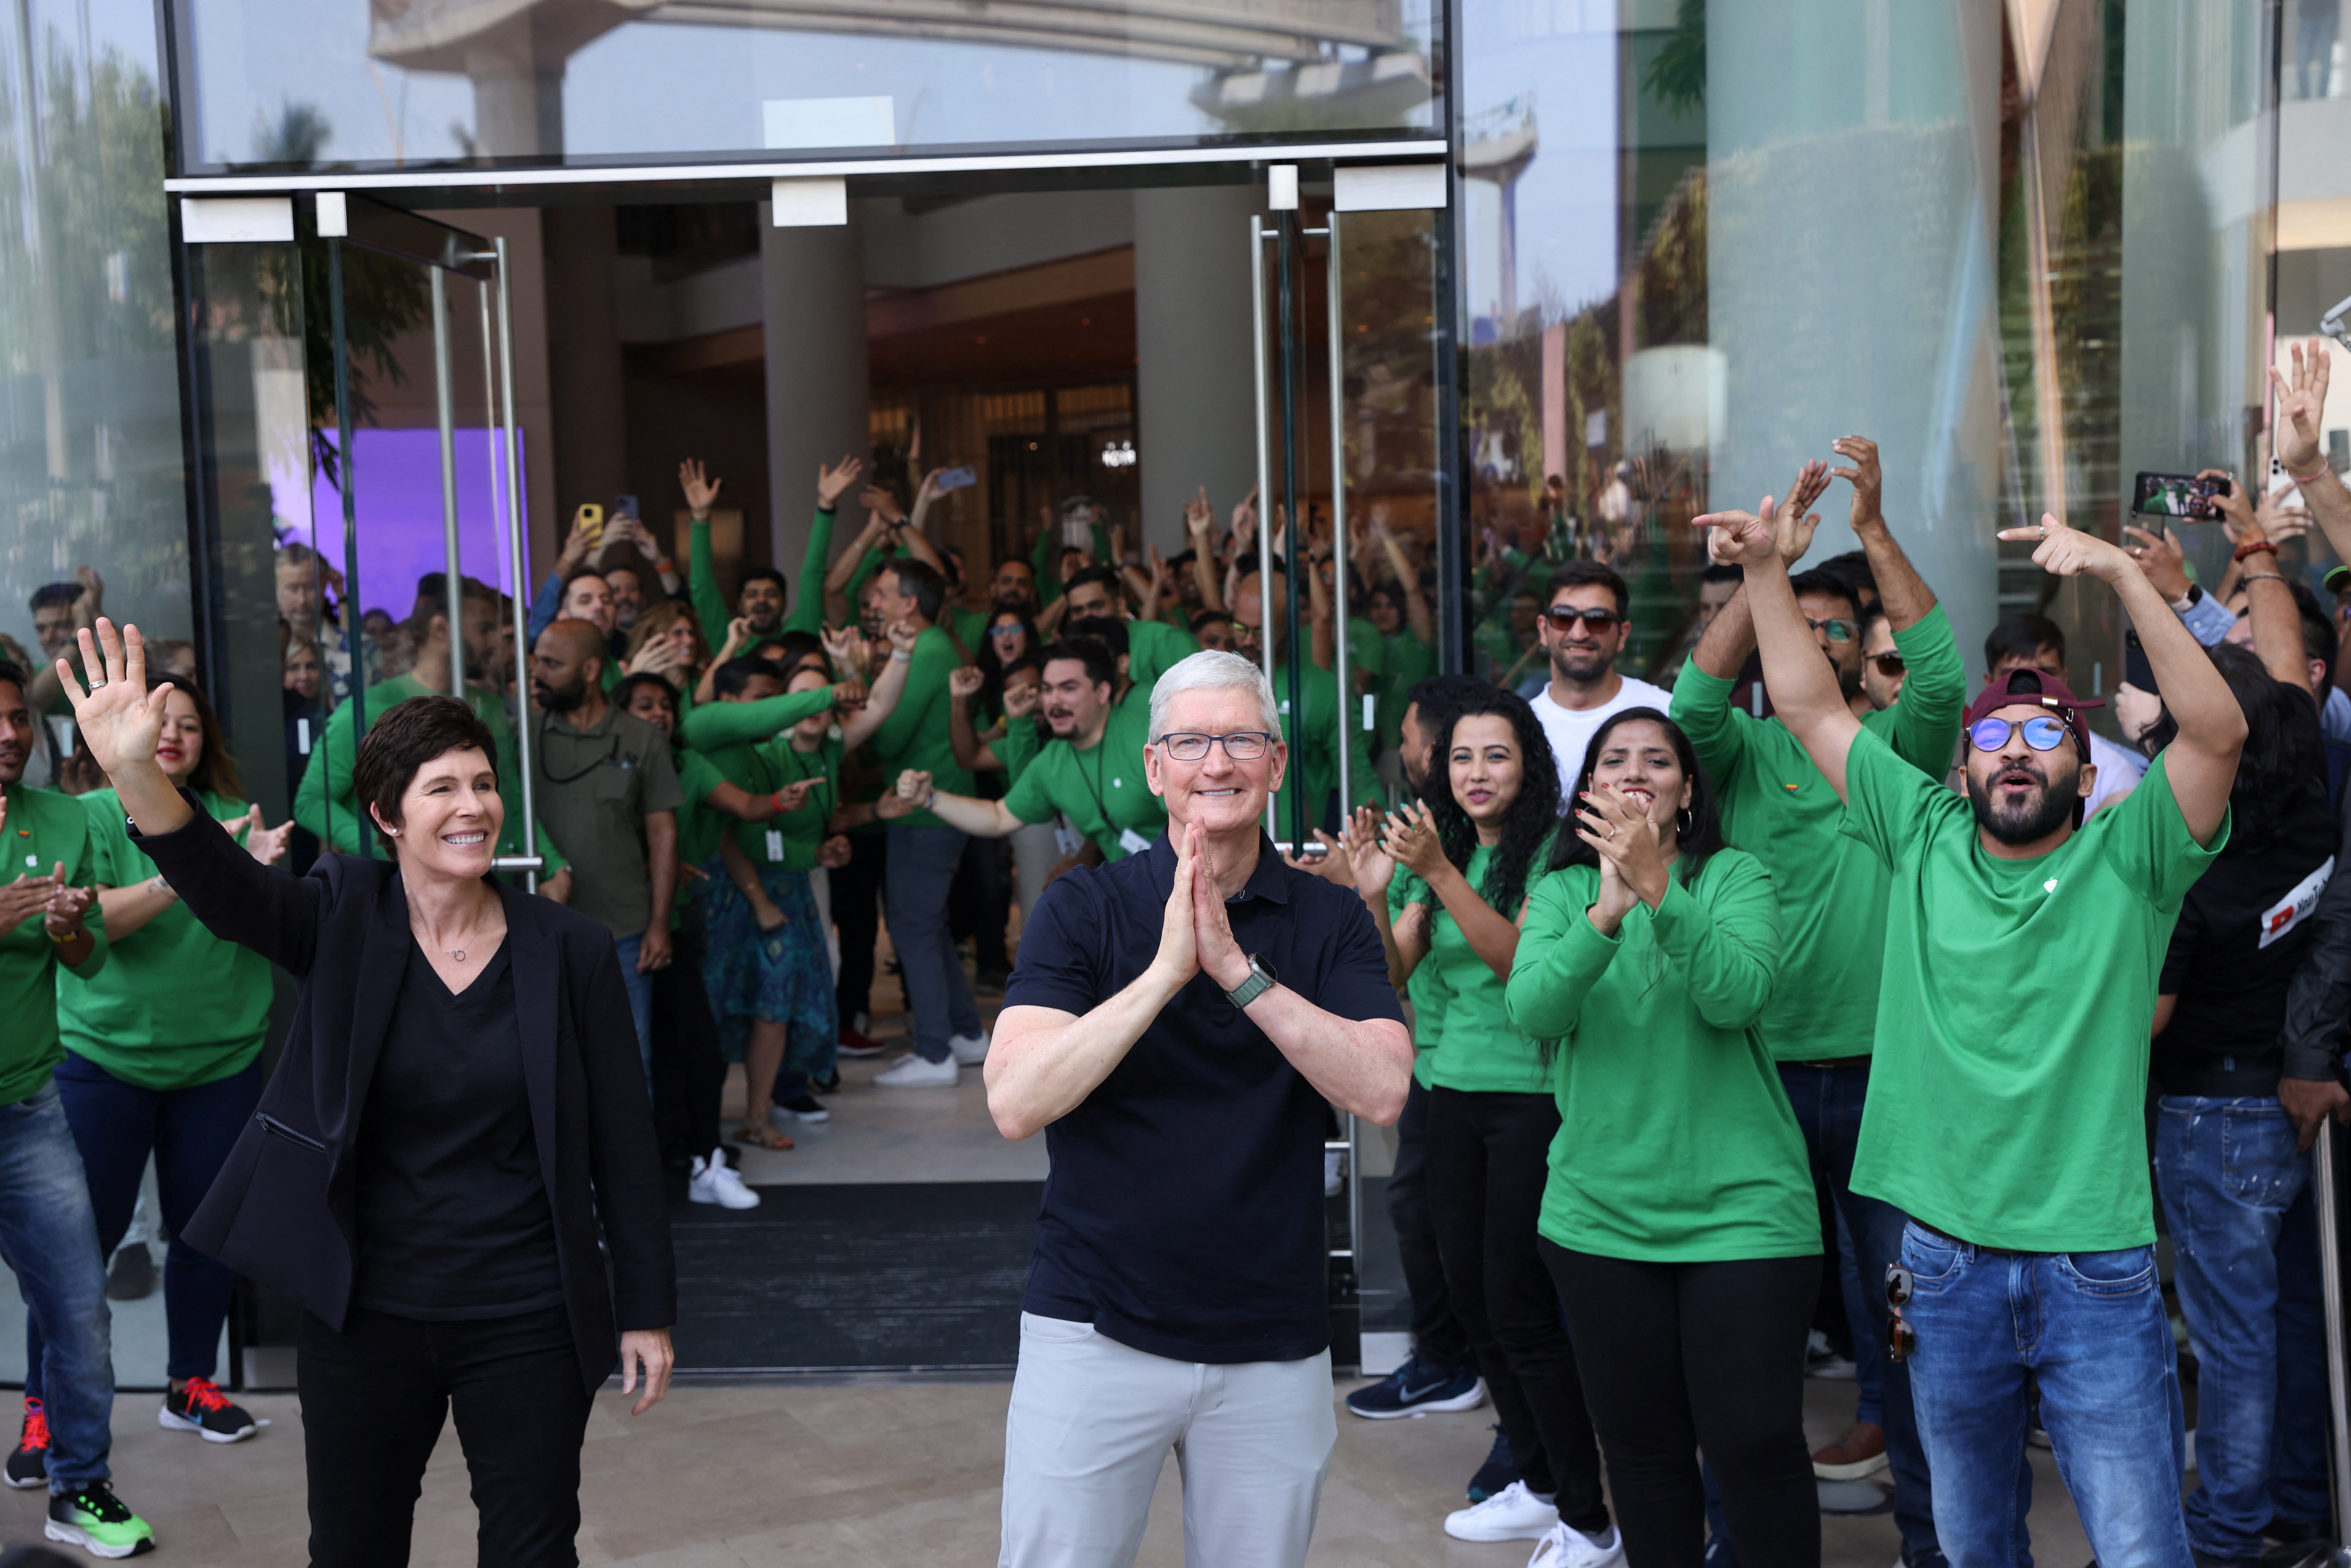 Apple CEO Tim Cook and Deirdre O’Brien, Apple’s senior vice president of Retail and People greet people at the inauguration of India’s first Apple retail store